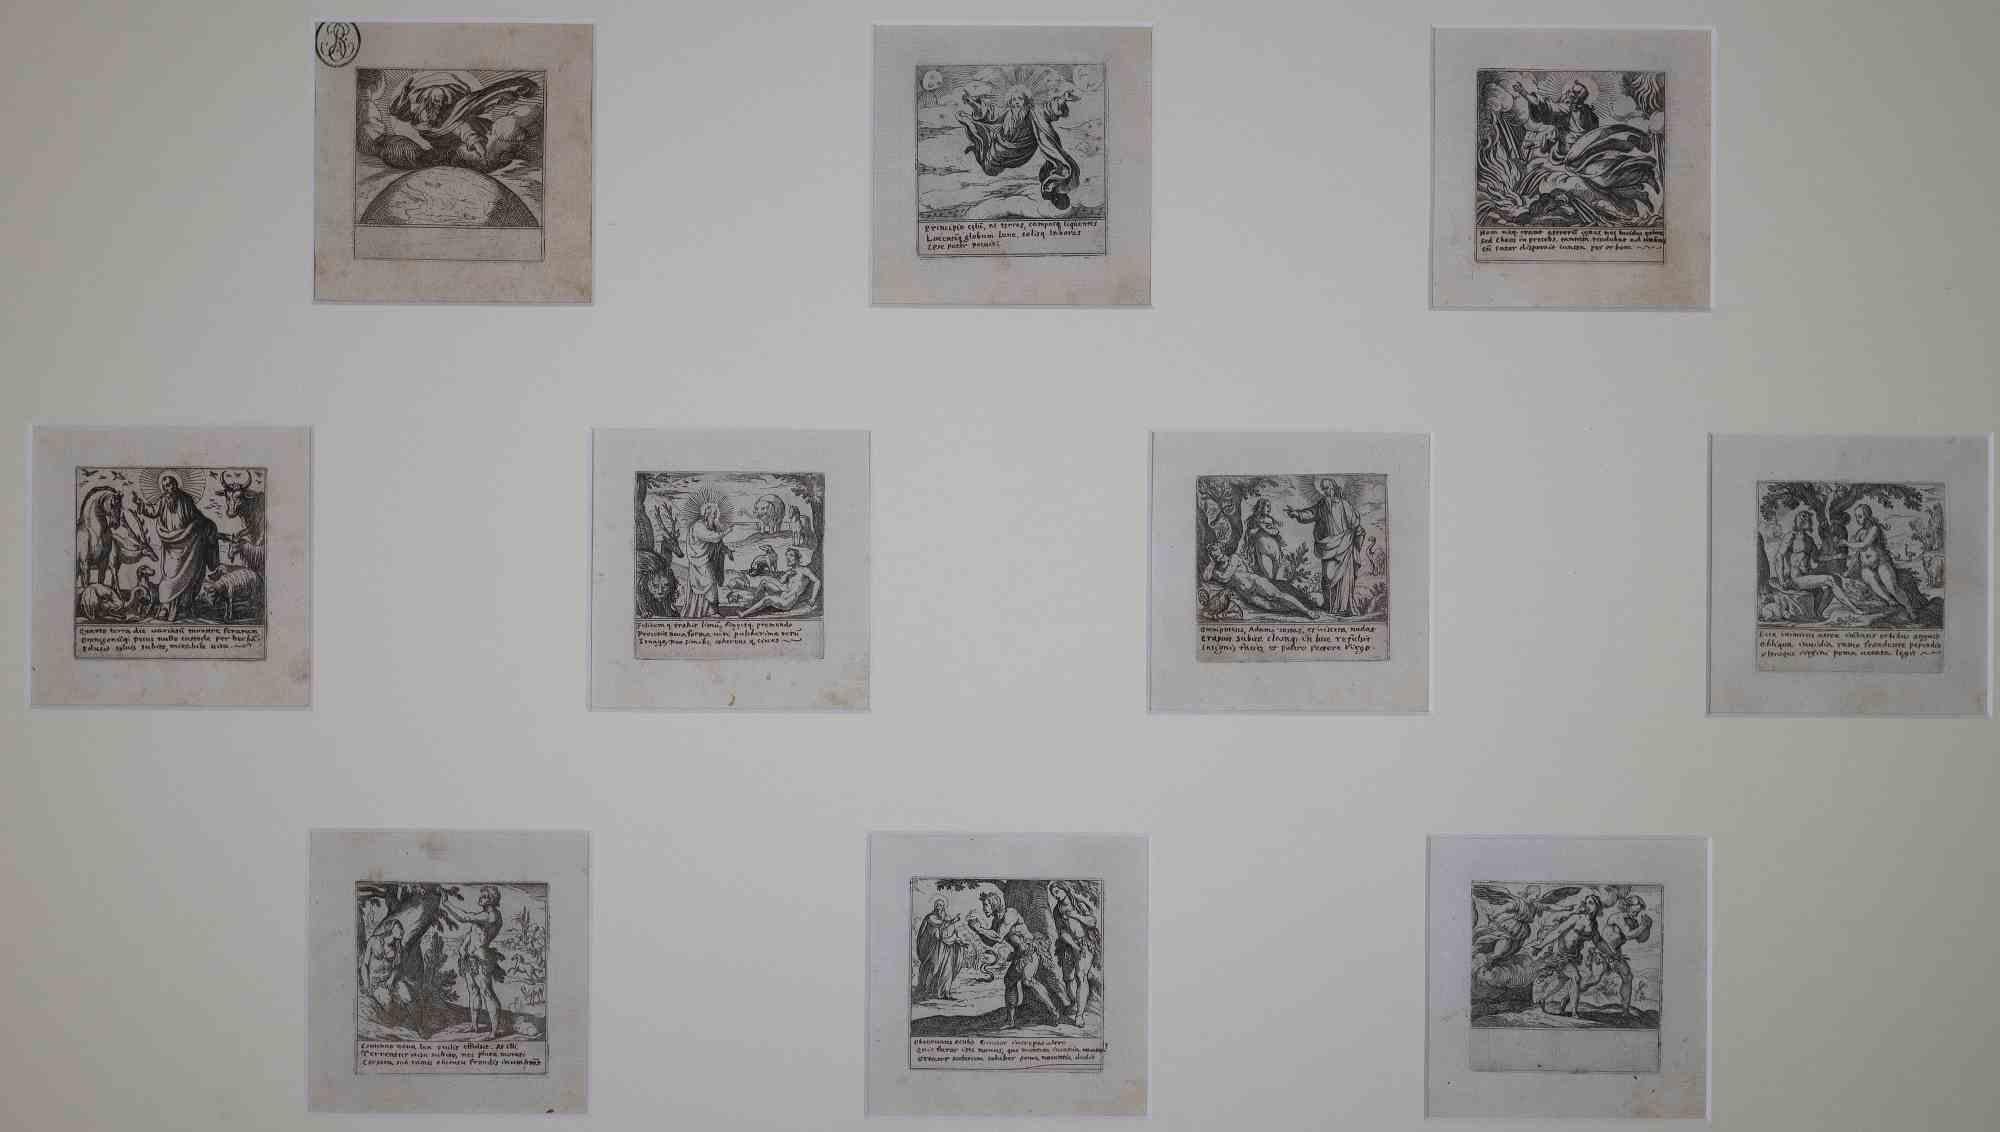 Plates of Old Testament is a wonderful black and white set of prints realized by the Italian master Antonio Tempesta (1555-1630) in the XVII century.

The ten plates depicting scenes of the Old testament WITH Inscriprions on plates

They are mounted